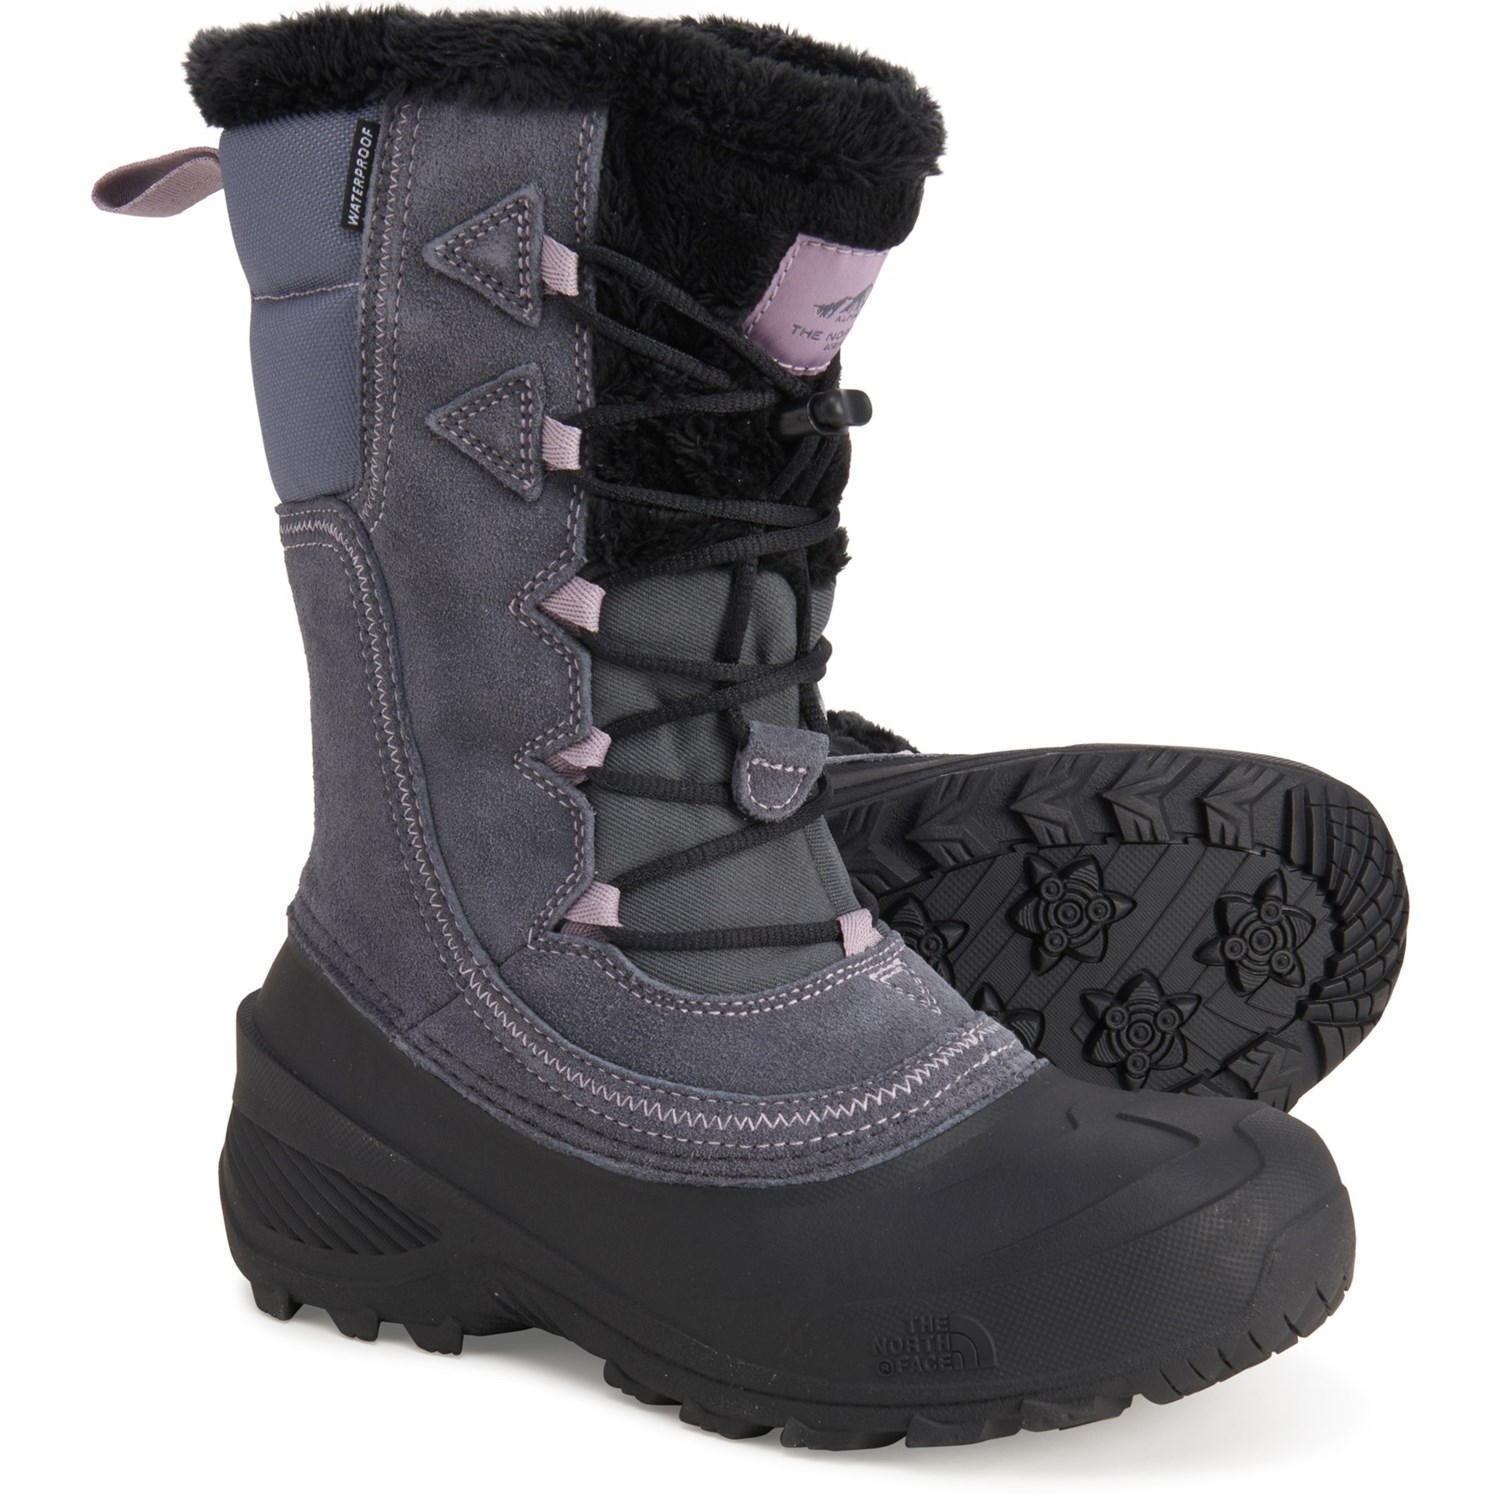 sierra trading post snow boots